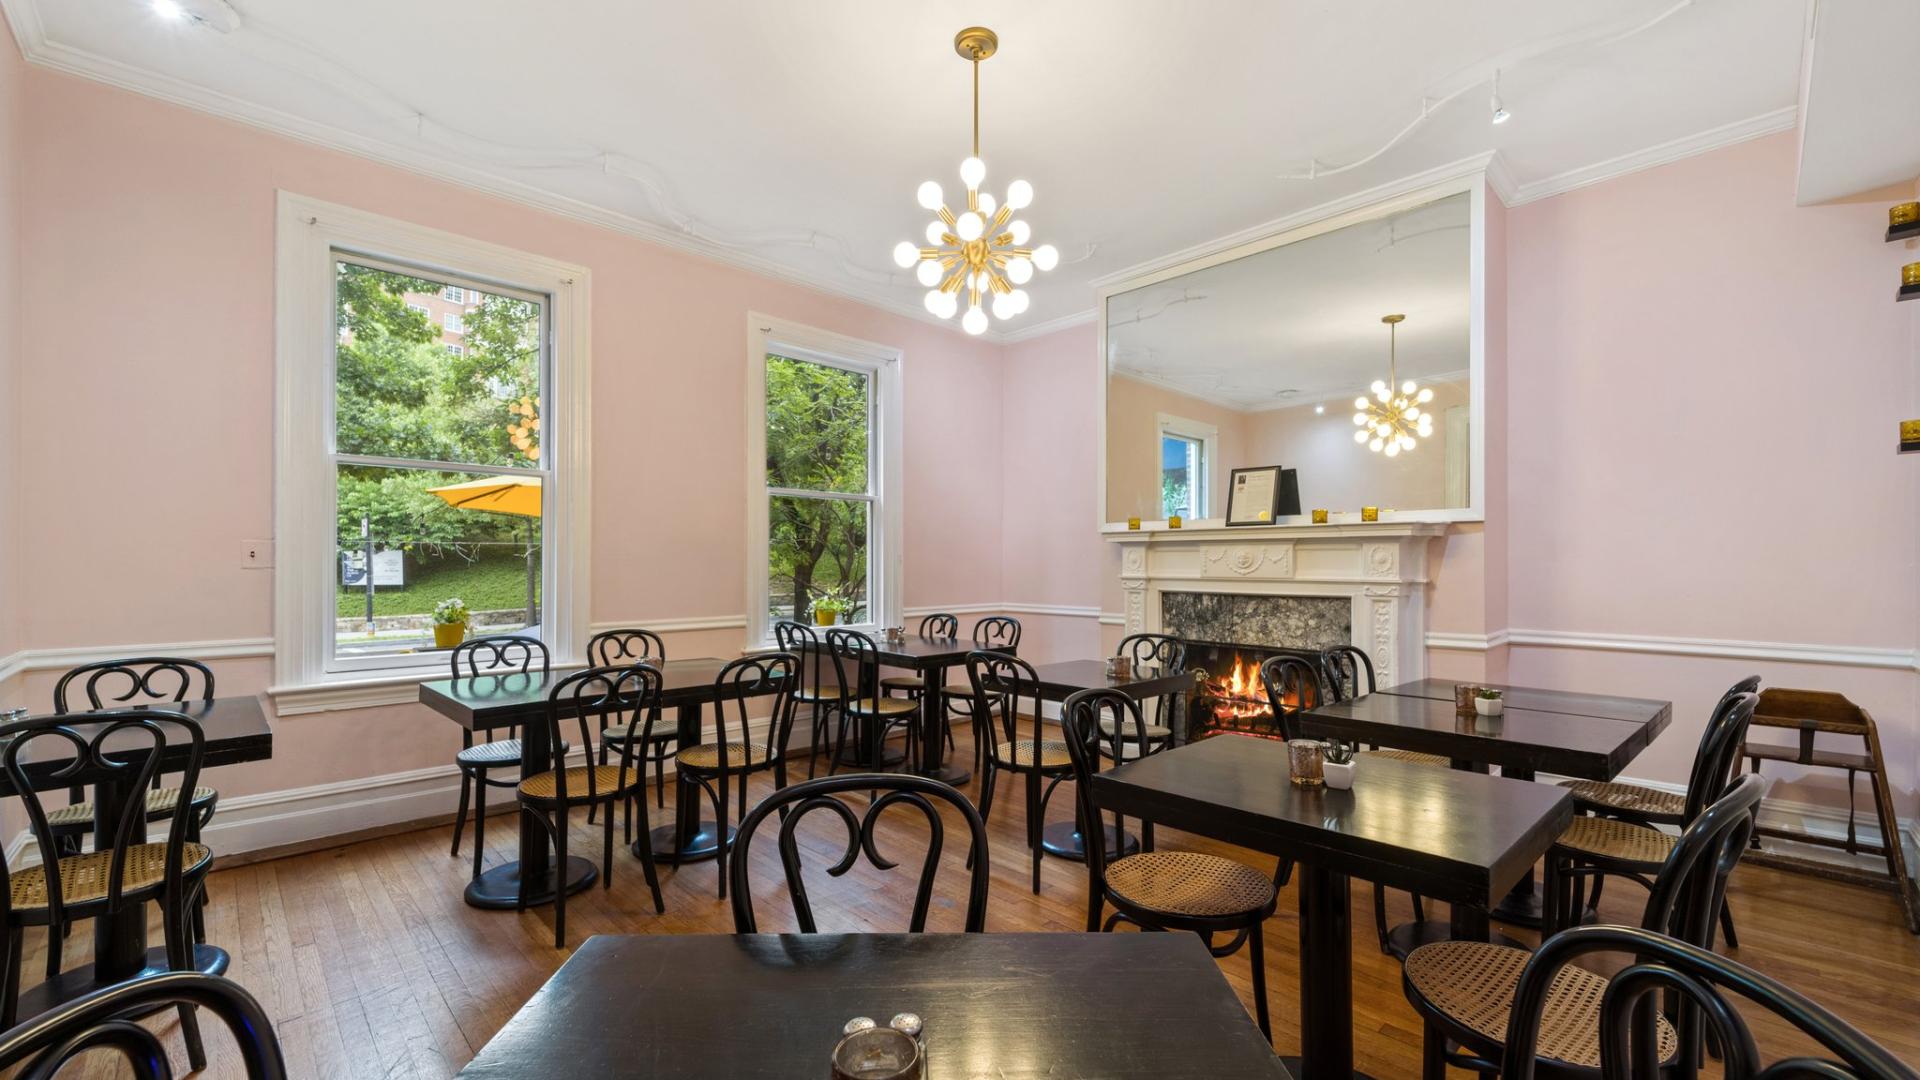 Cafe Venues for Rent in Washington, DC